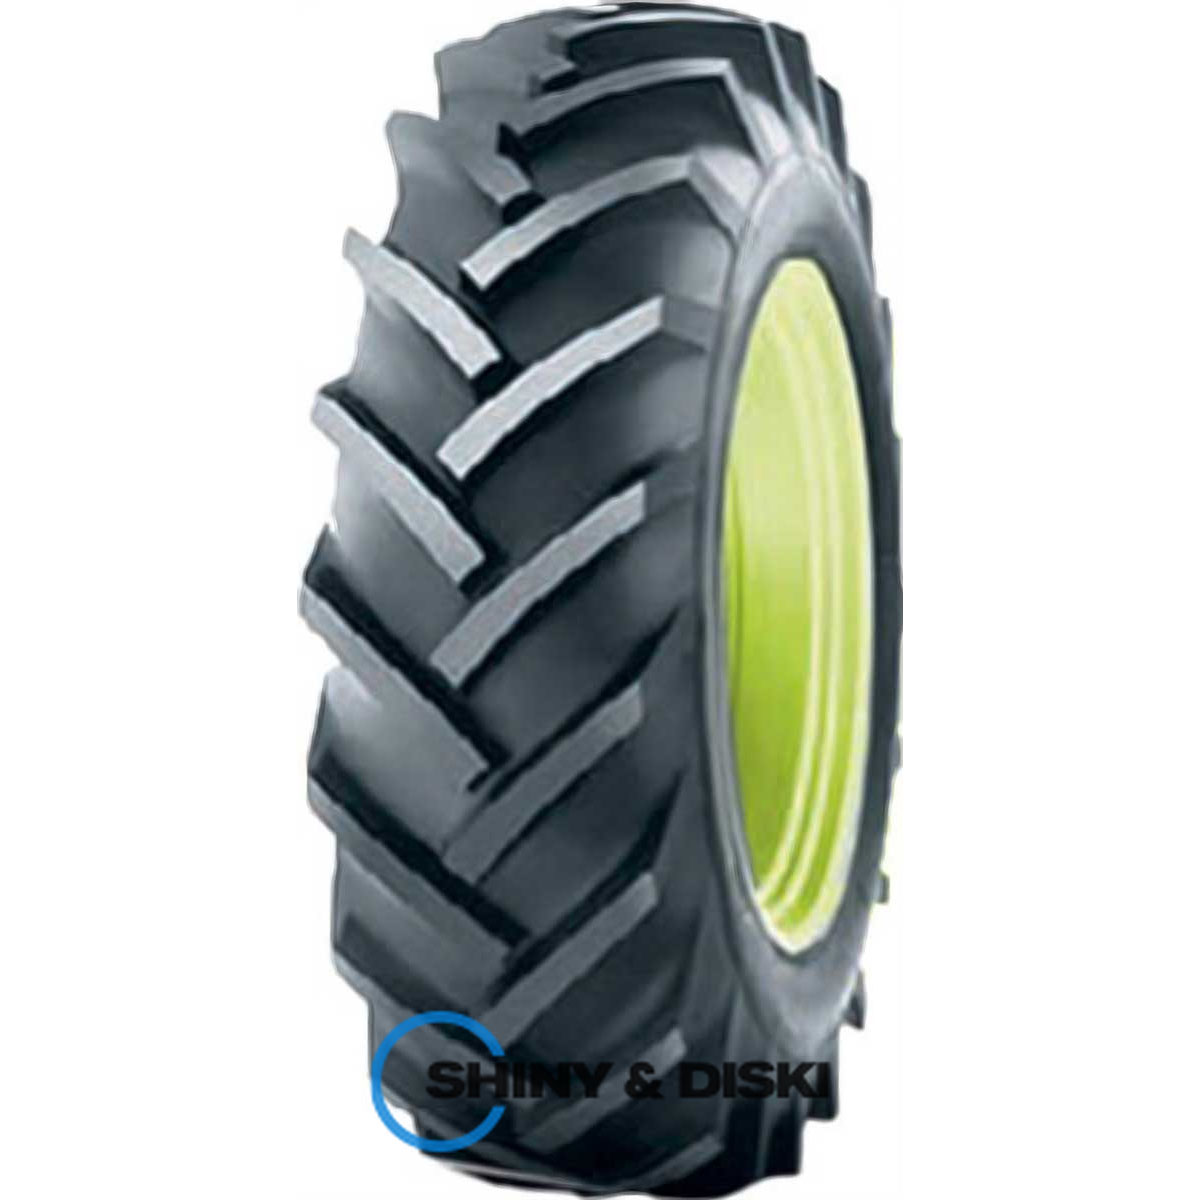 cultor as front 13 6.00-16 88a6/80a8